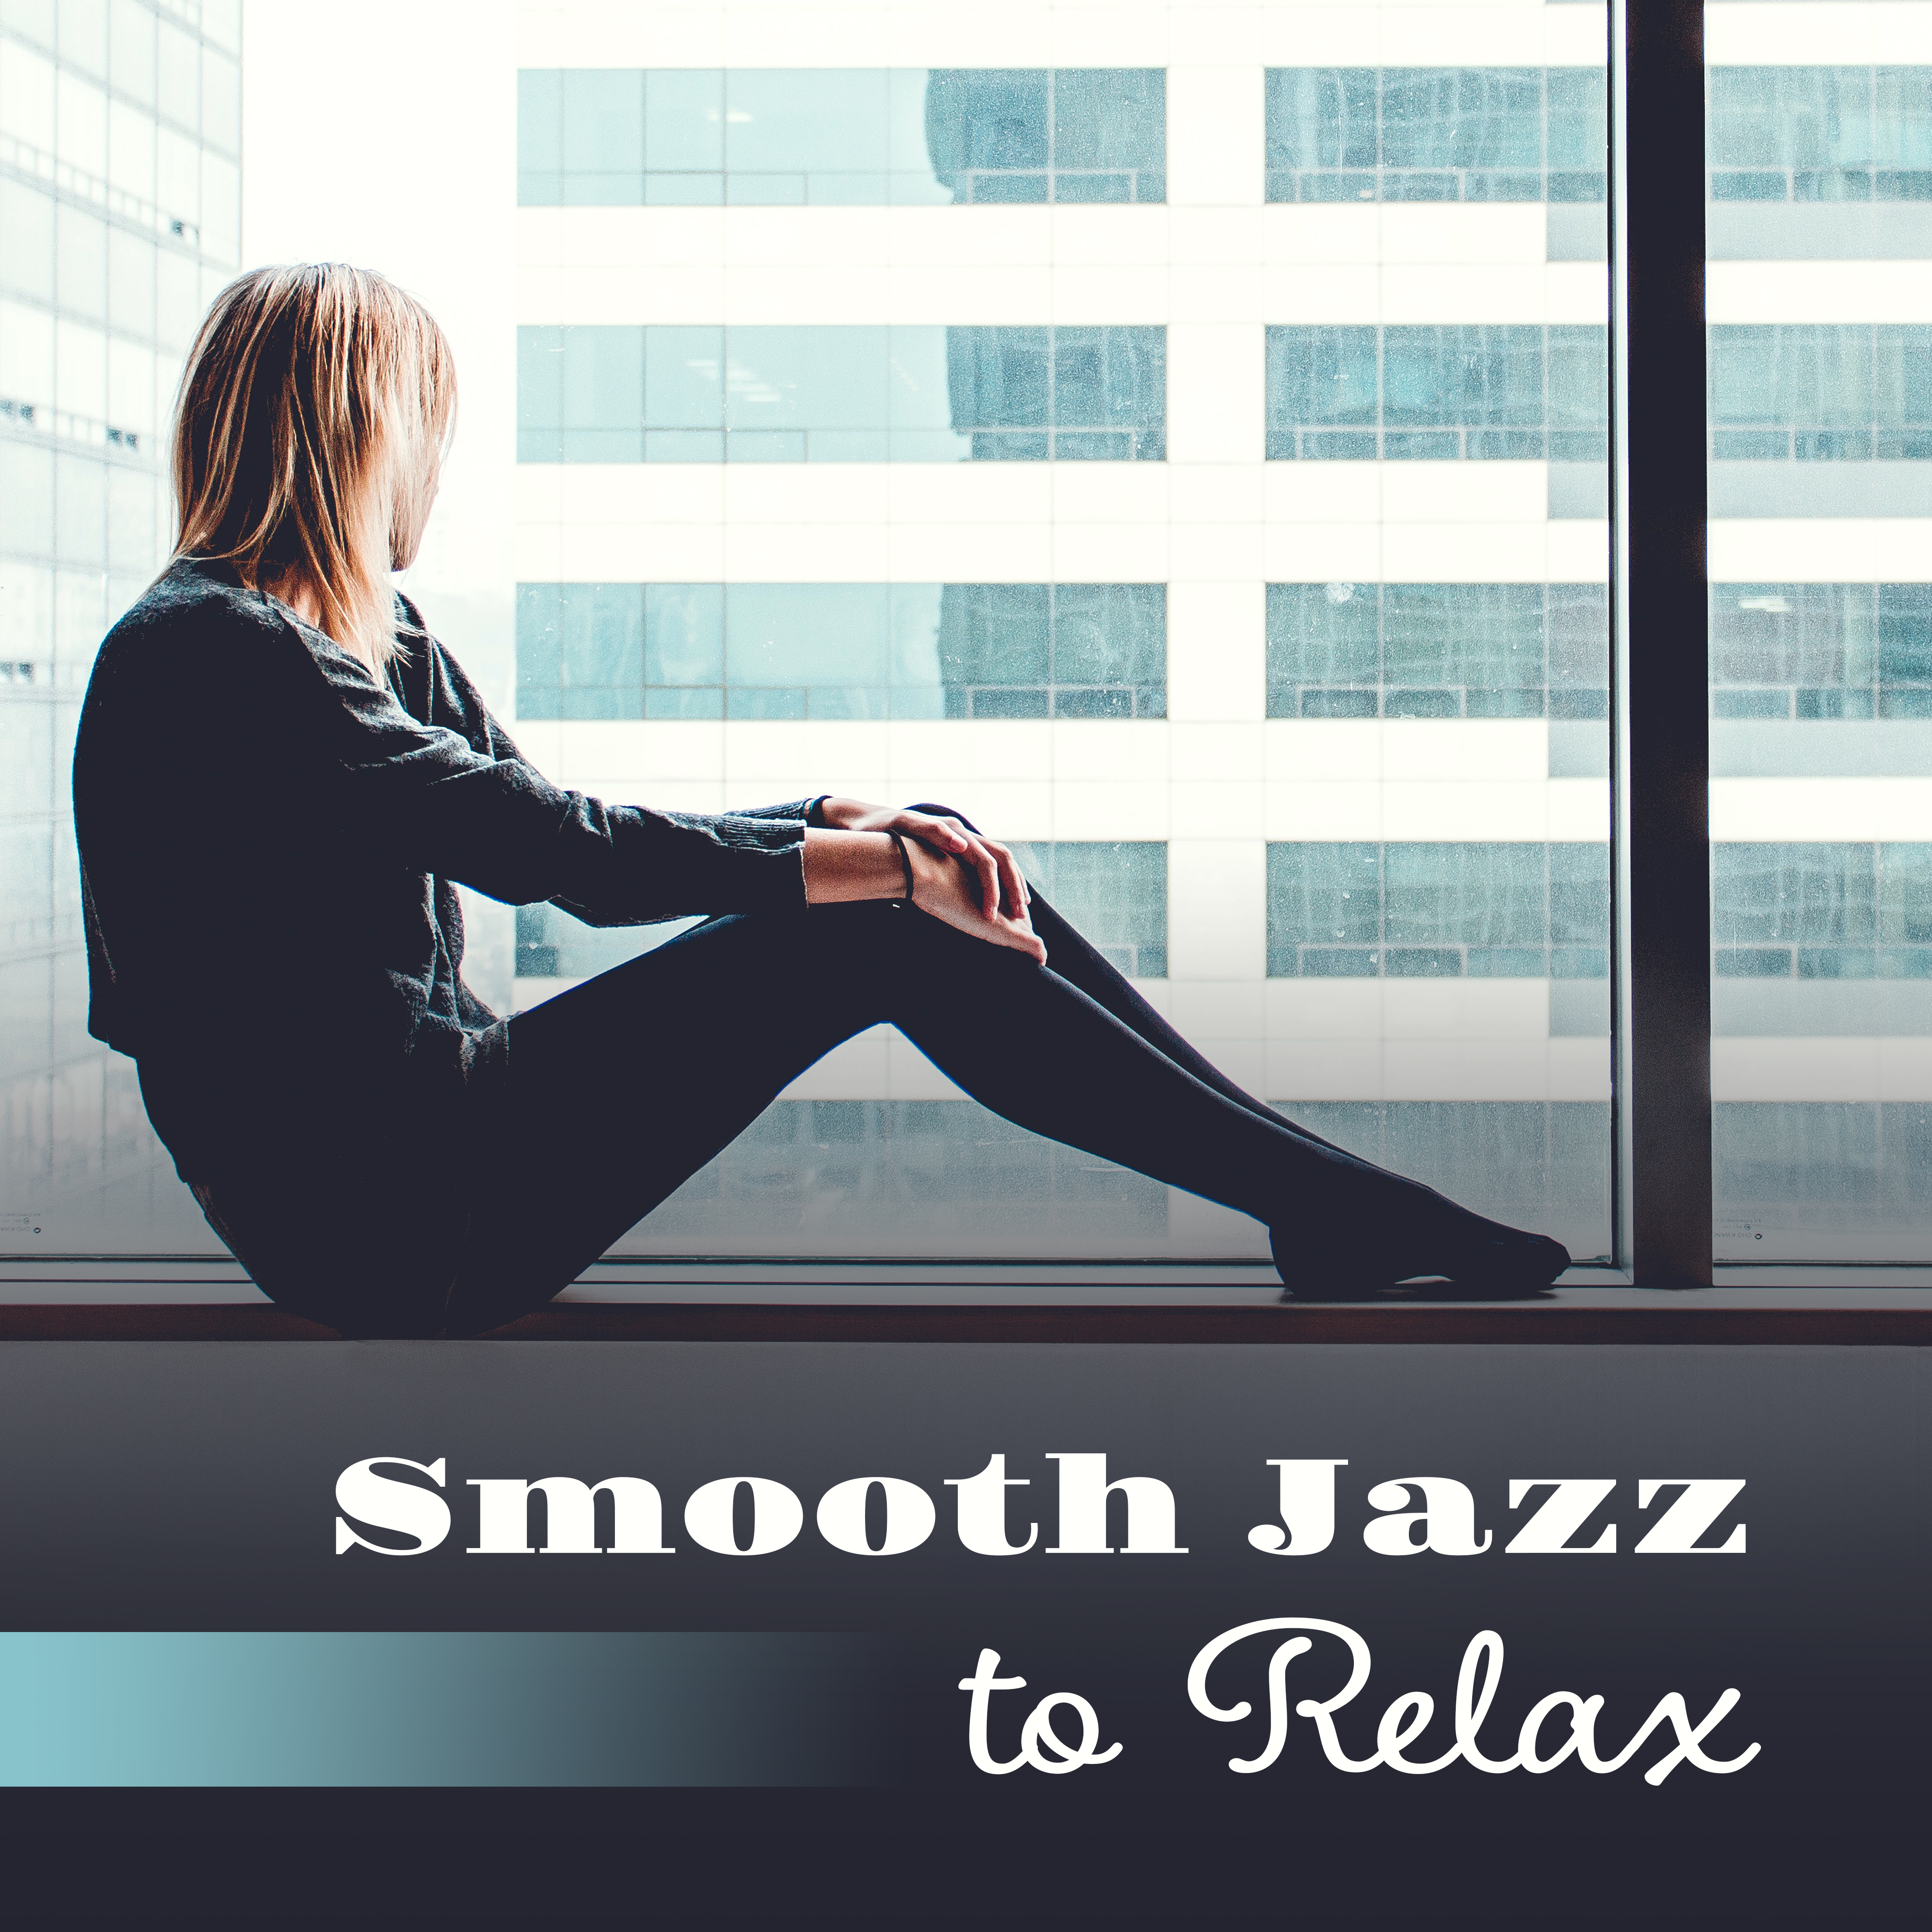 Smooth Jazz to Relax – Rest with Jazz Music, Night Full of Jazz, Sensual Note